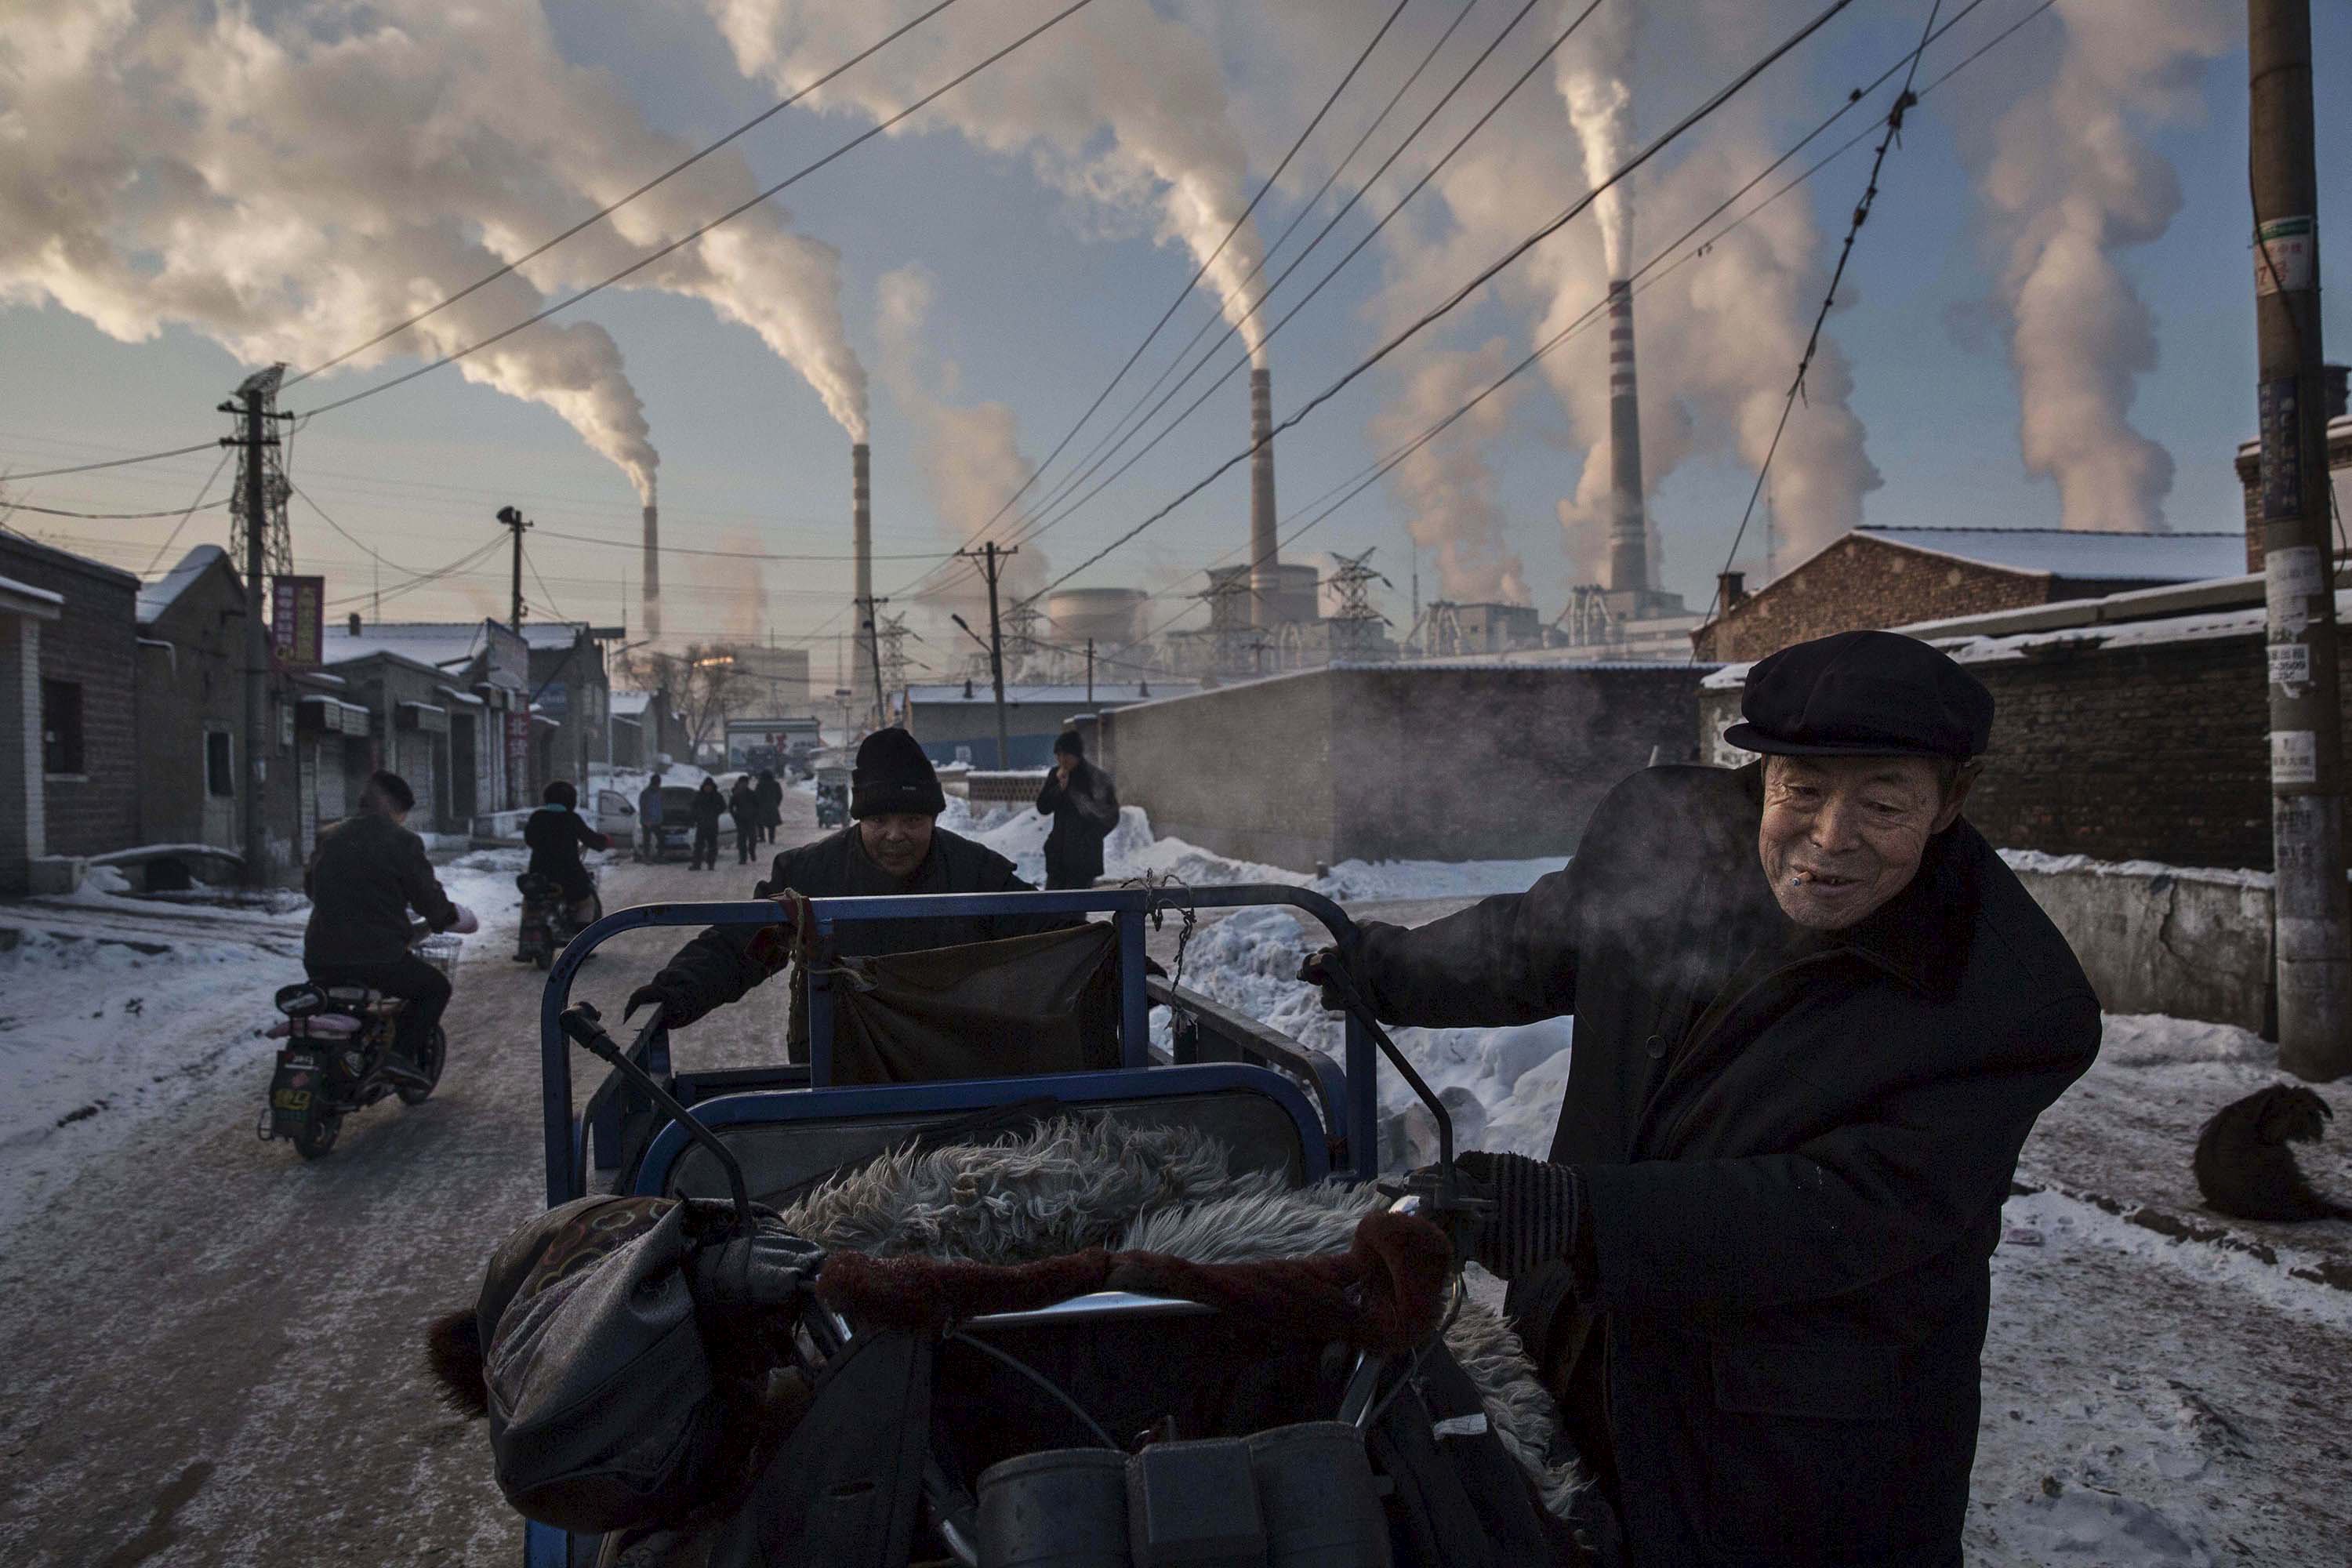 Daily Life, 1st prize singles (Kevin Frayer – China’s Coal Addiction)